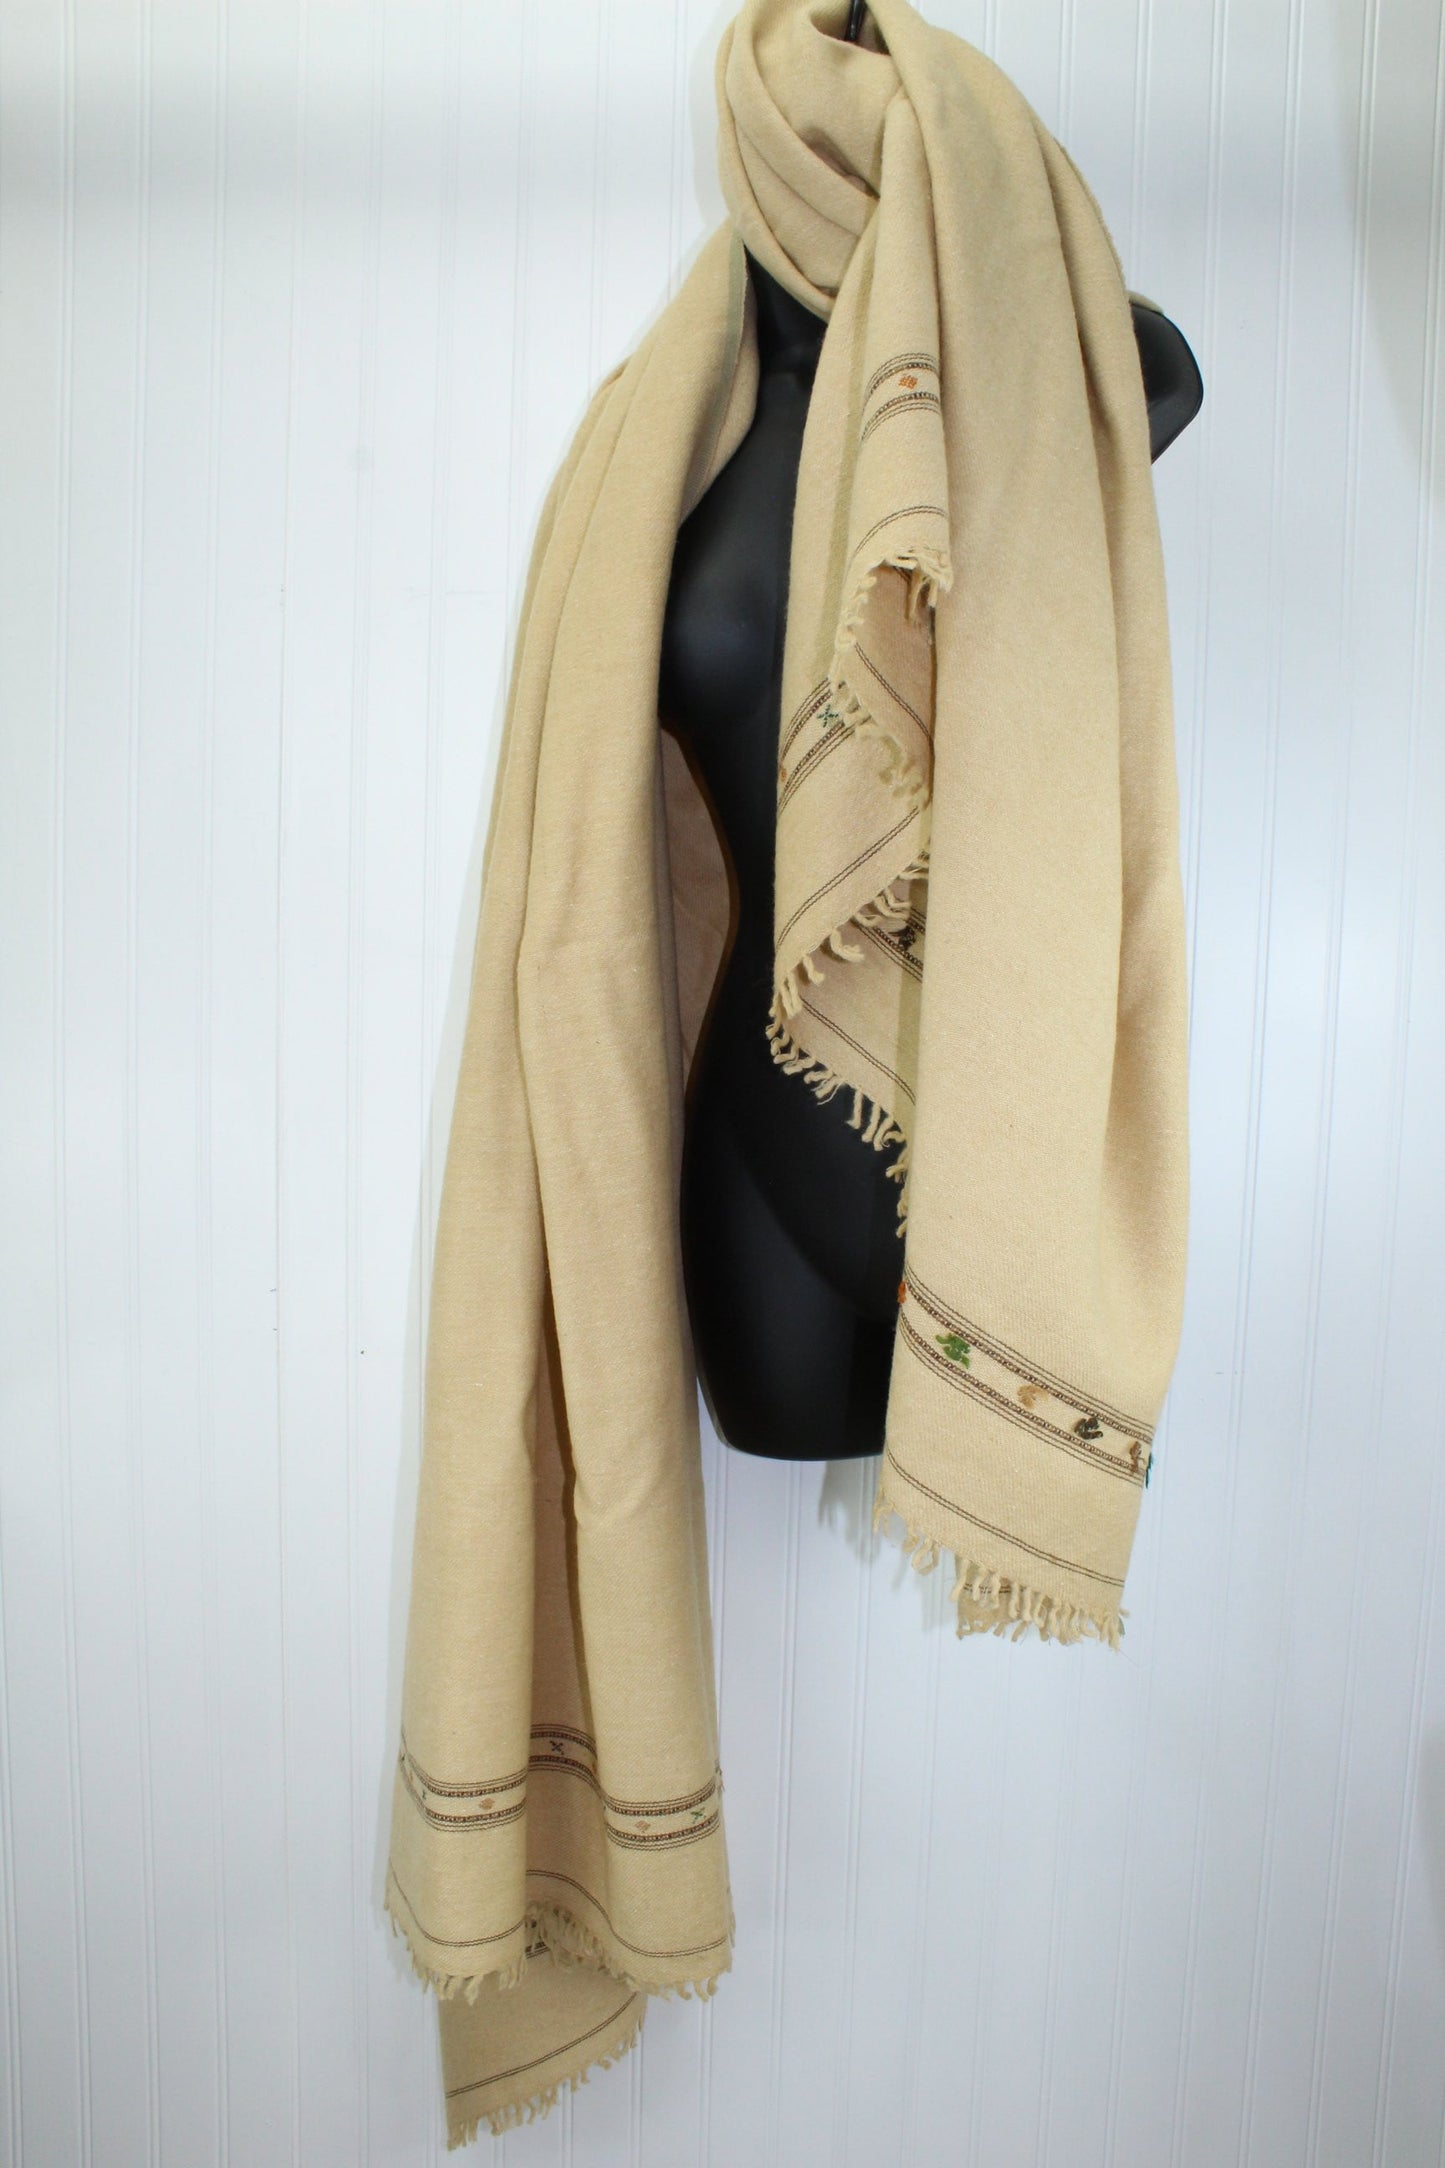 Wool Lightweight Flannel Blanket - Hand Embroidered Decor or Wearable Wrap beige green brown